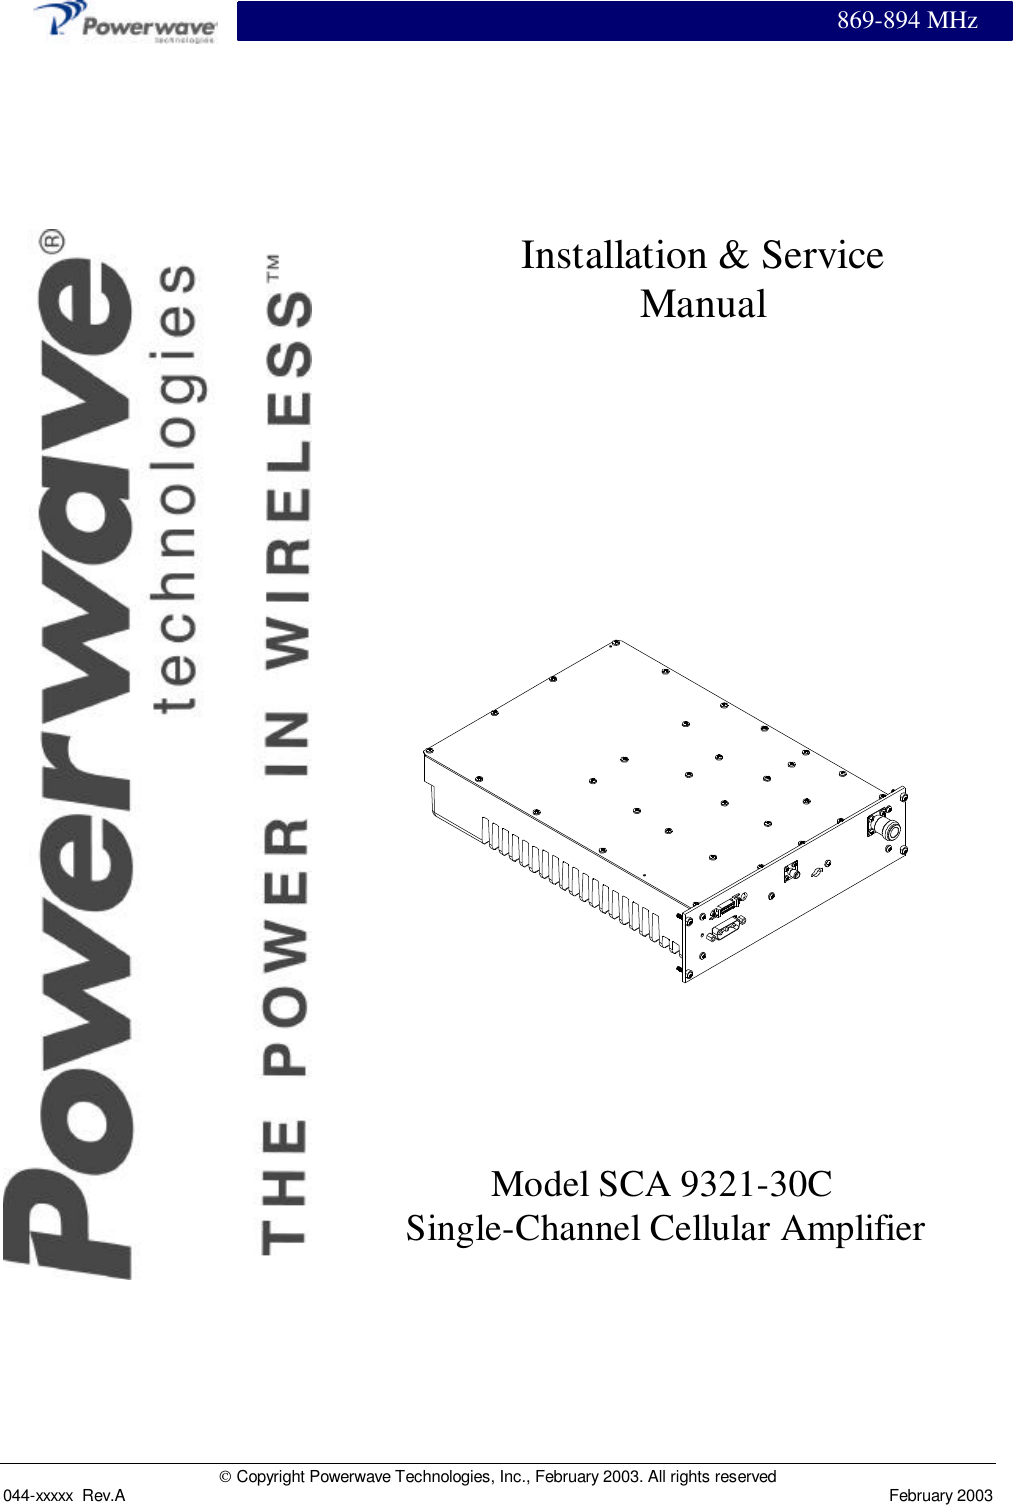 869-894 MHz Copyright Powerwave Technologies, Inc., February 2003. All rights reserved044-xxxxx  Rev.A February 2003Model SCA 9321-30C Single-Channel Cellular AmplifierInstallation &amp; ServiceManual